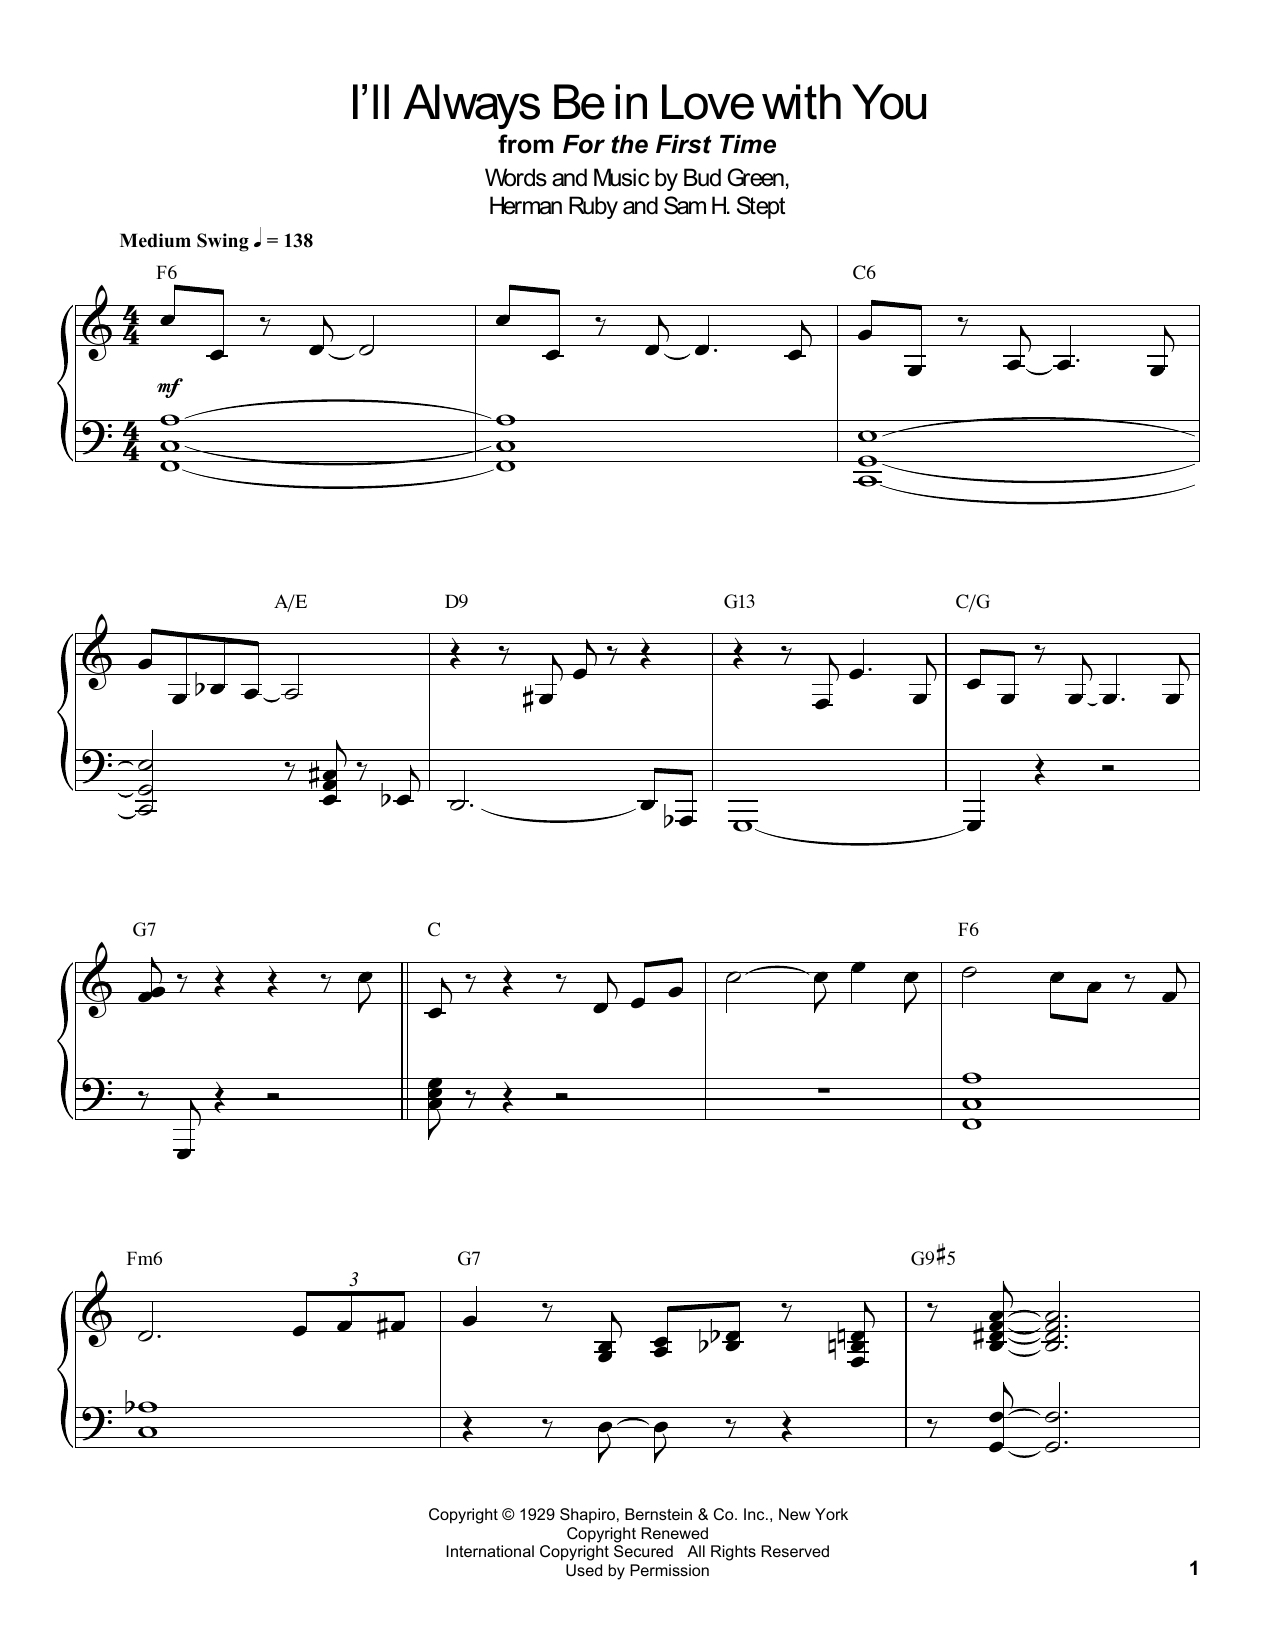 Download Count Basie I'll Always Be In Love With You Sheet Music